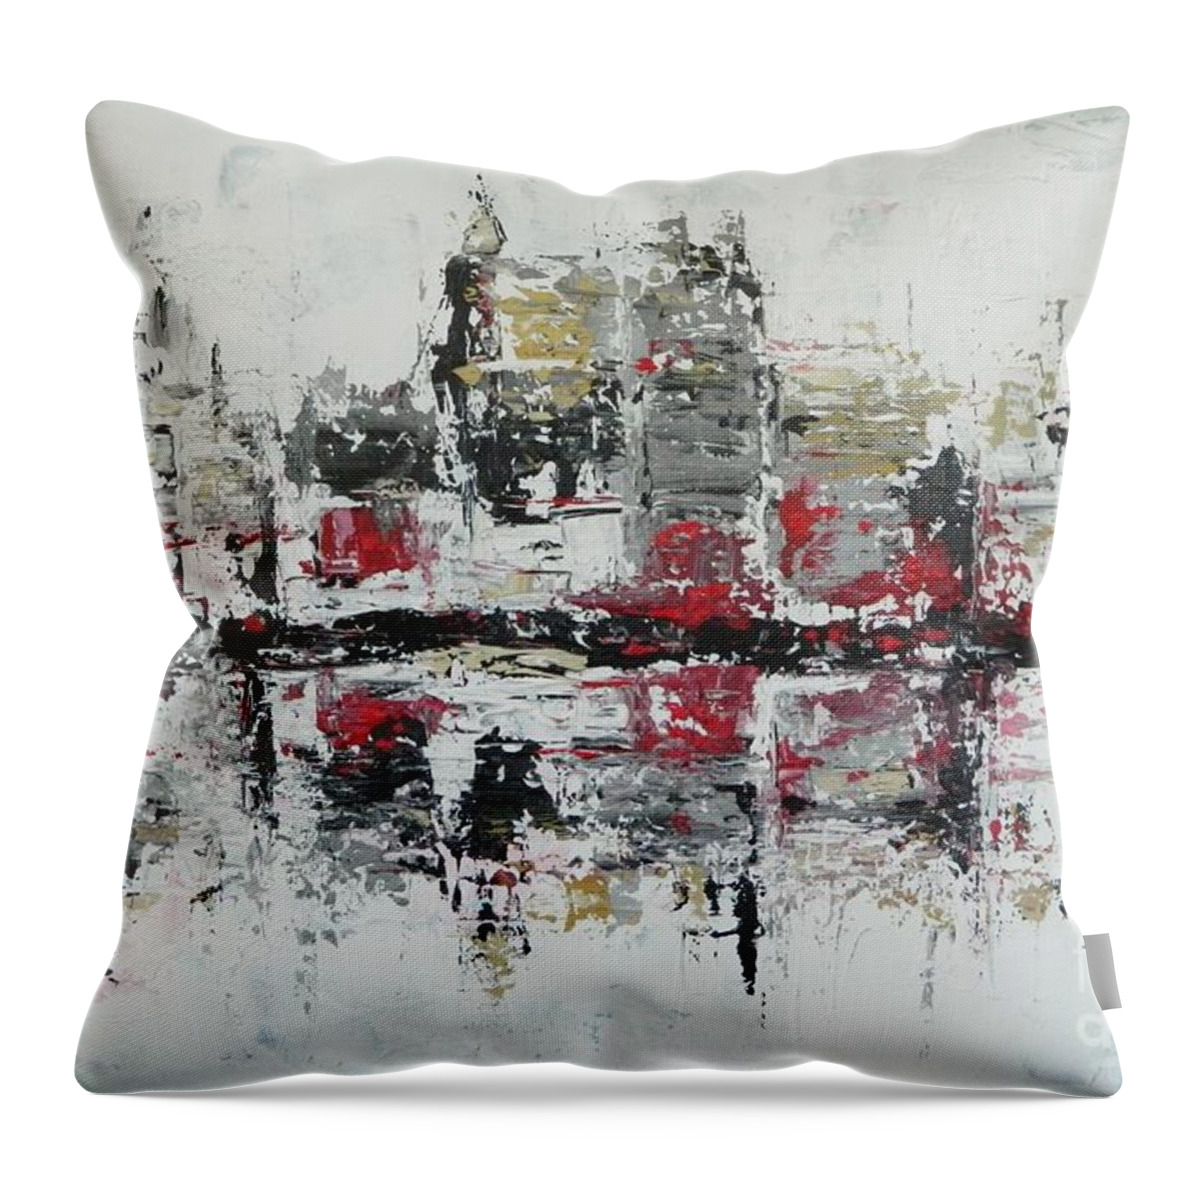 Raleigh Throw Pillow featuring the painting Raleigh Town by Dan Campbell